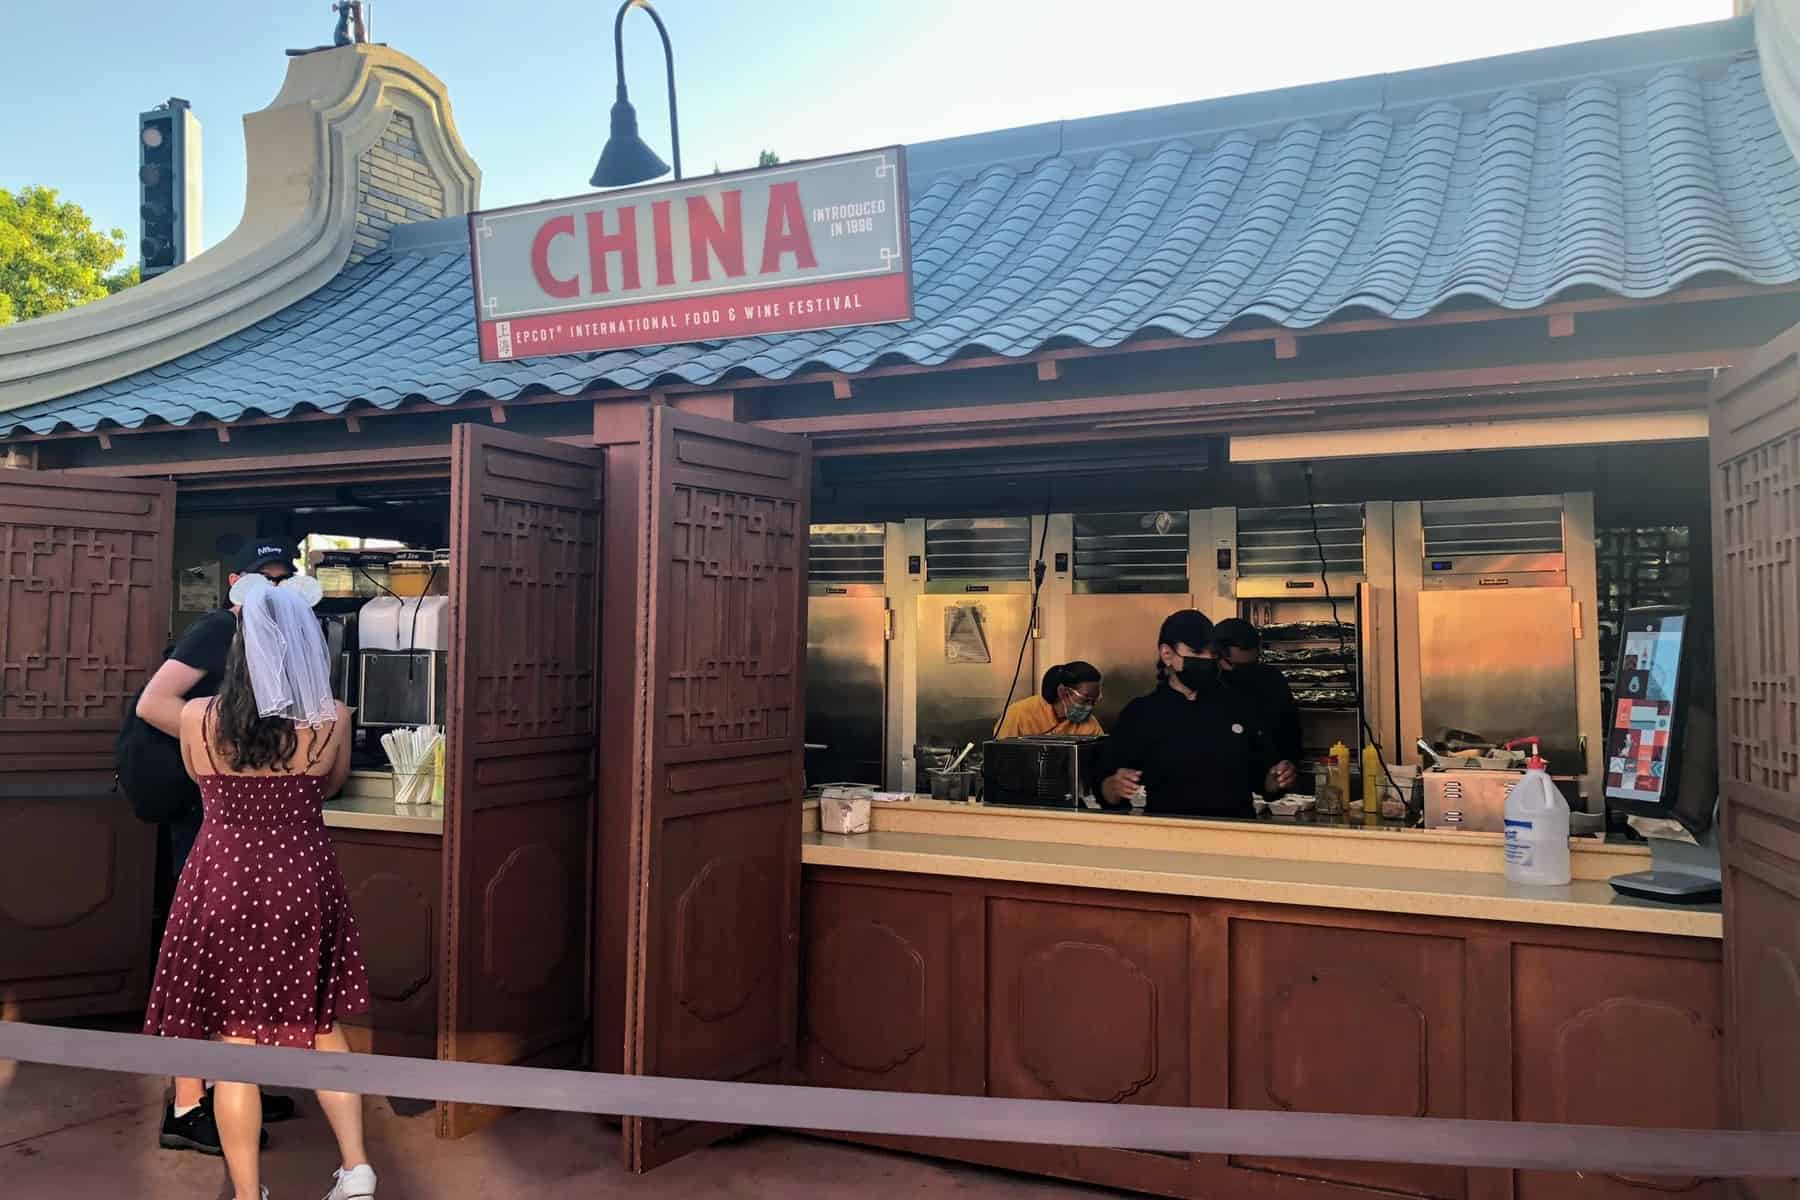 China Booth Menu & Review (Epcot Food & Wine Festival)